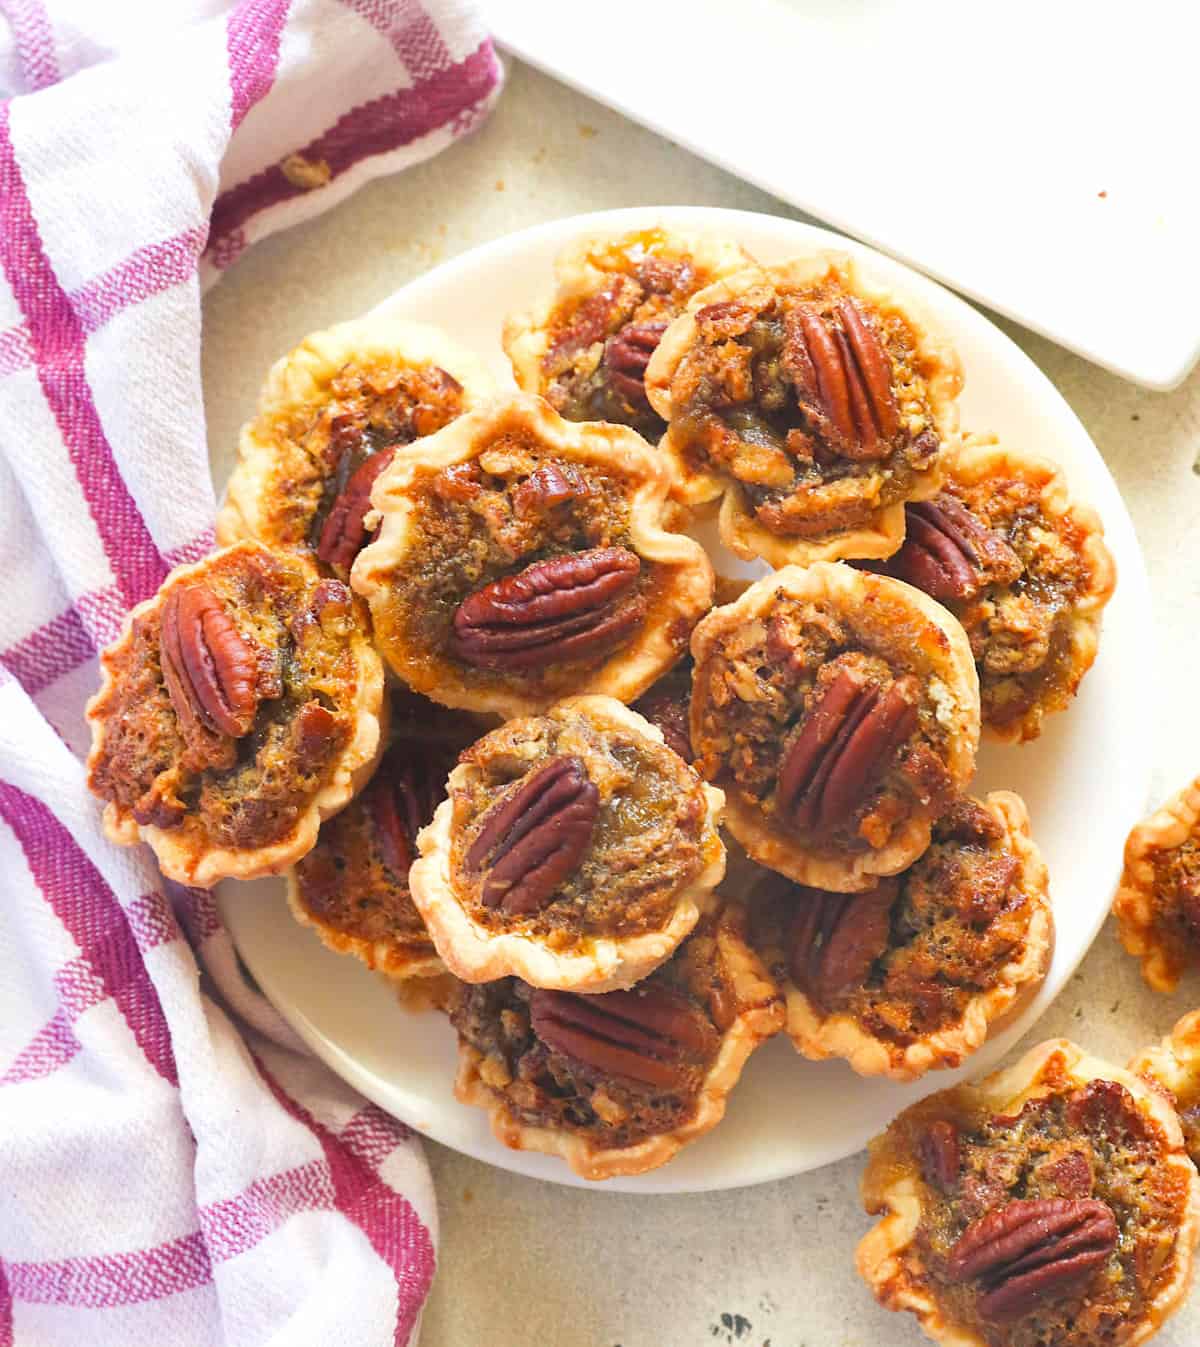 A plateful of insanely delicious mini pecan pies